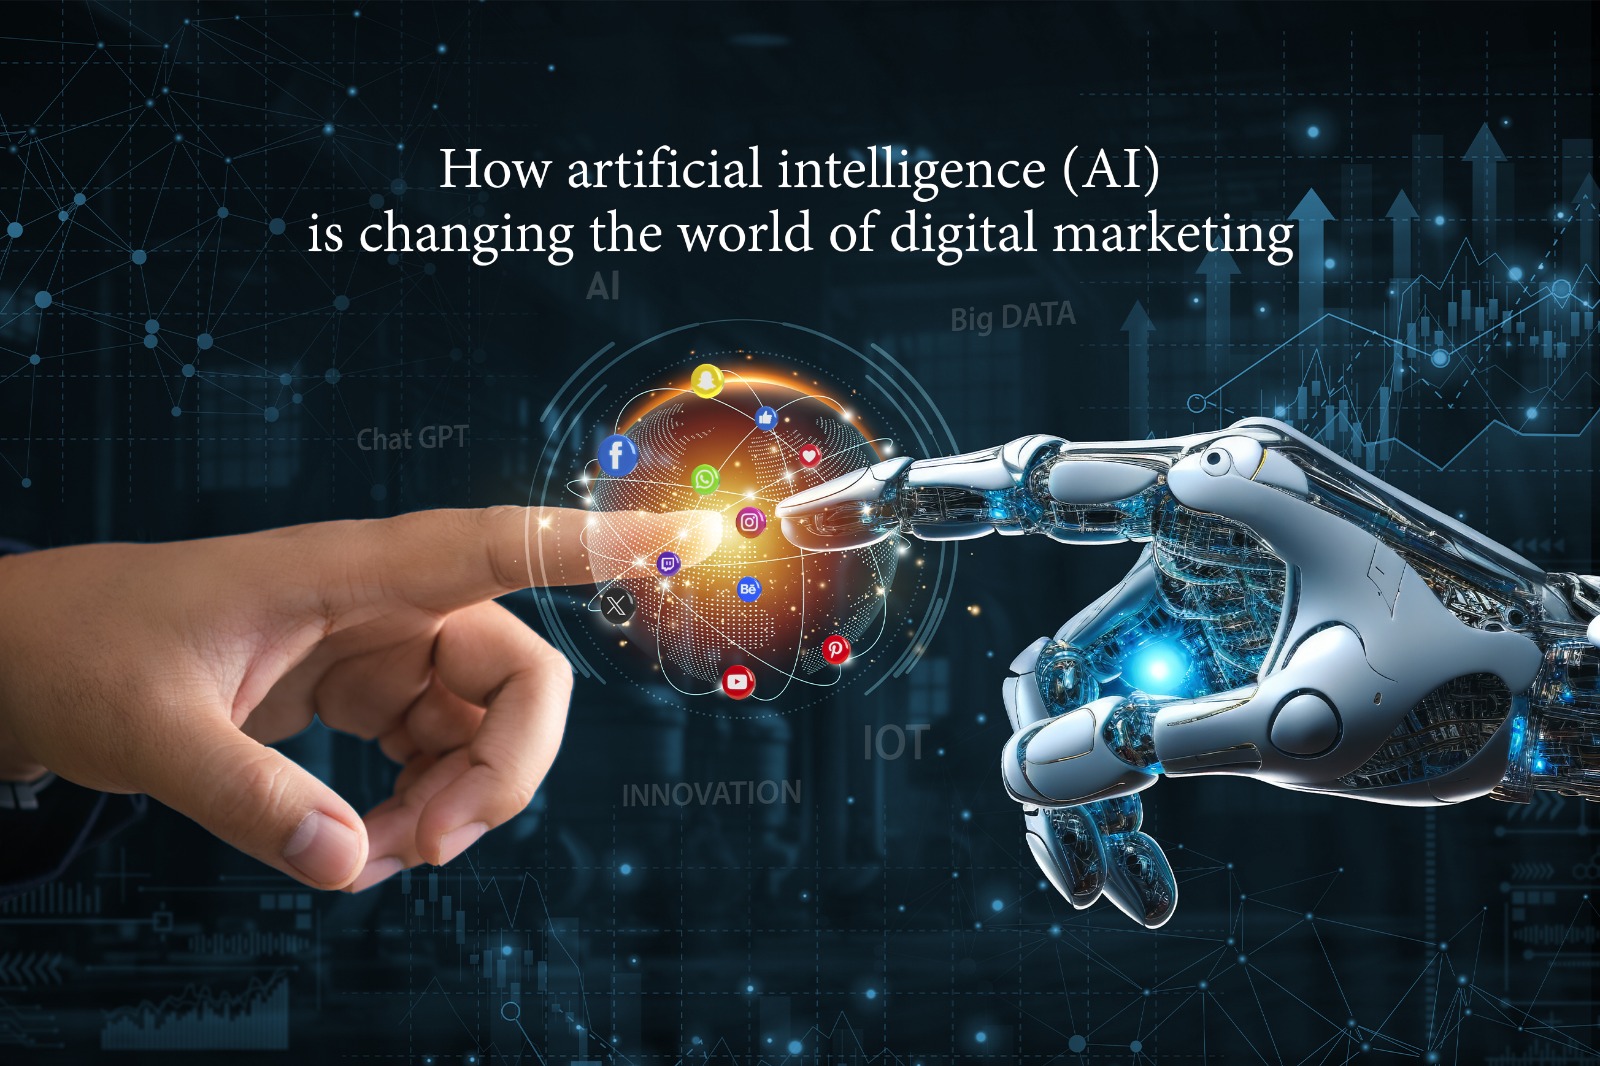 The Role of Artificial Intelligence in Revolutionizing Digital Marketing